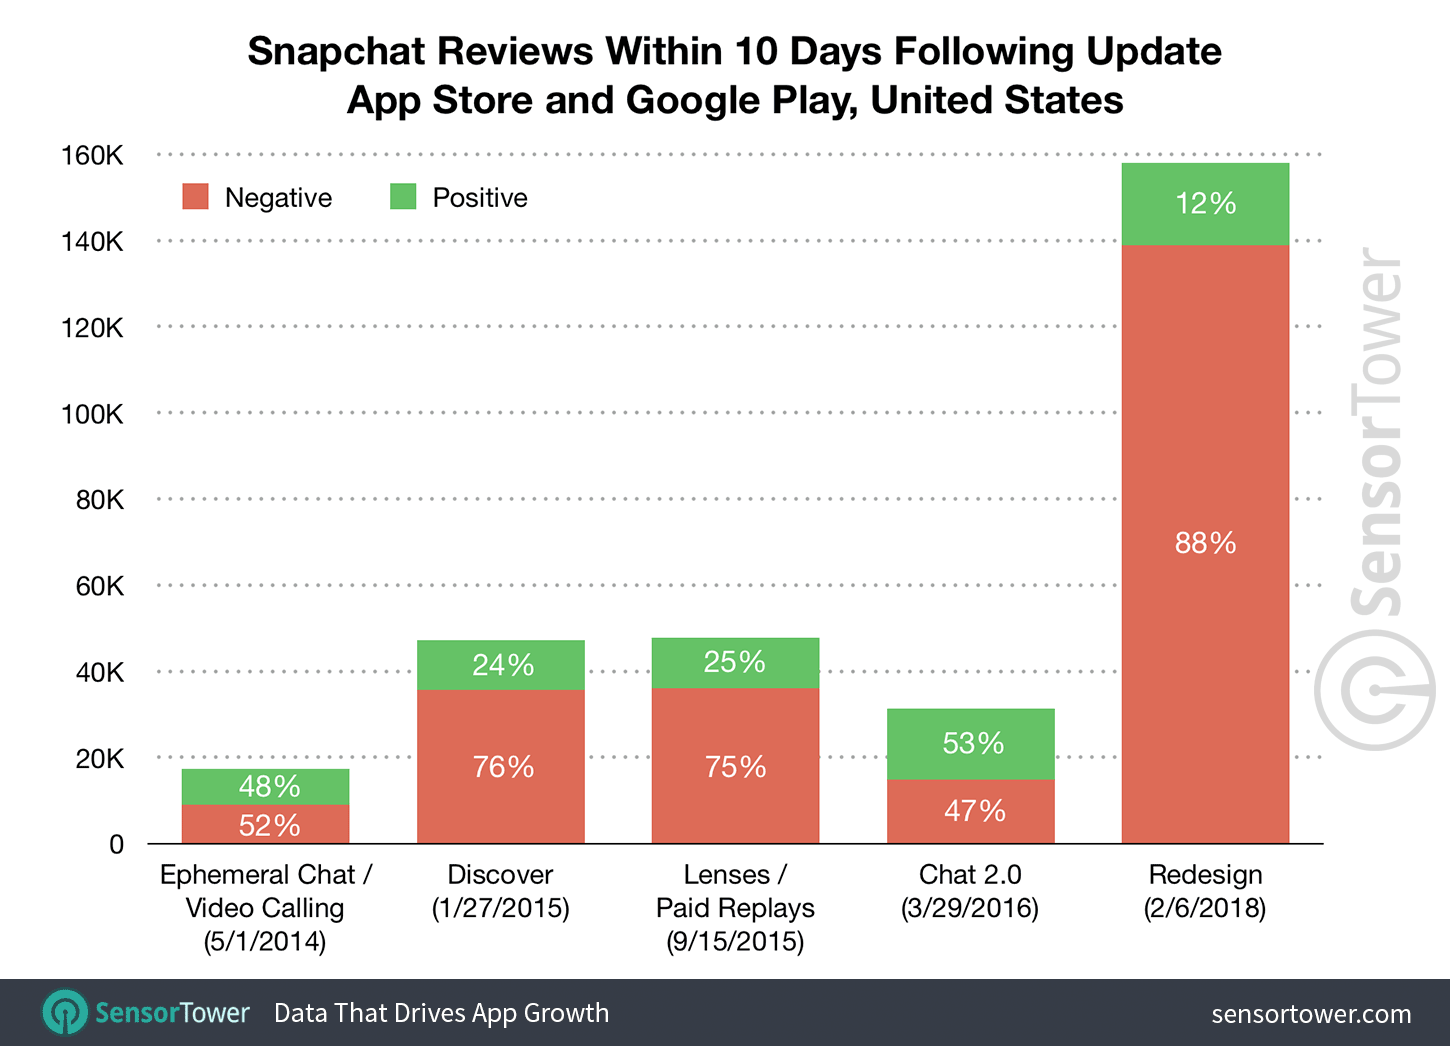 Post-Update Snapchat Reviews in the United States